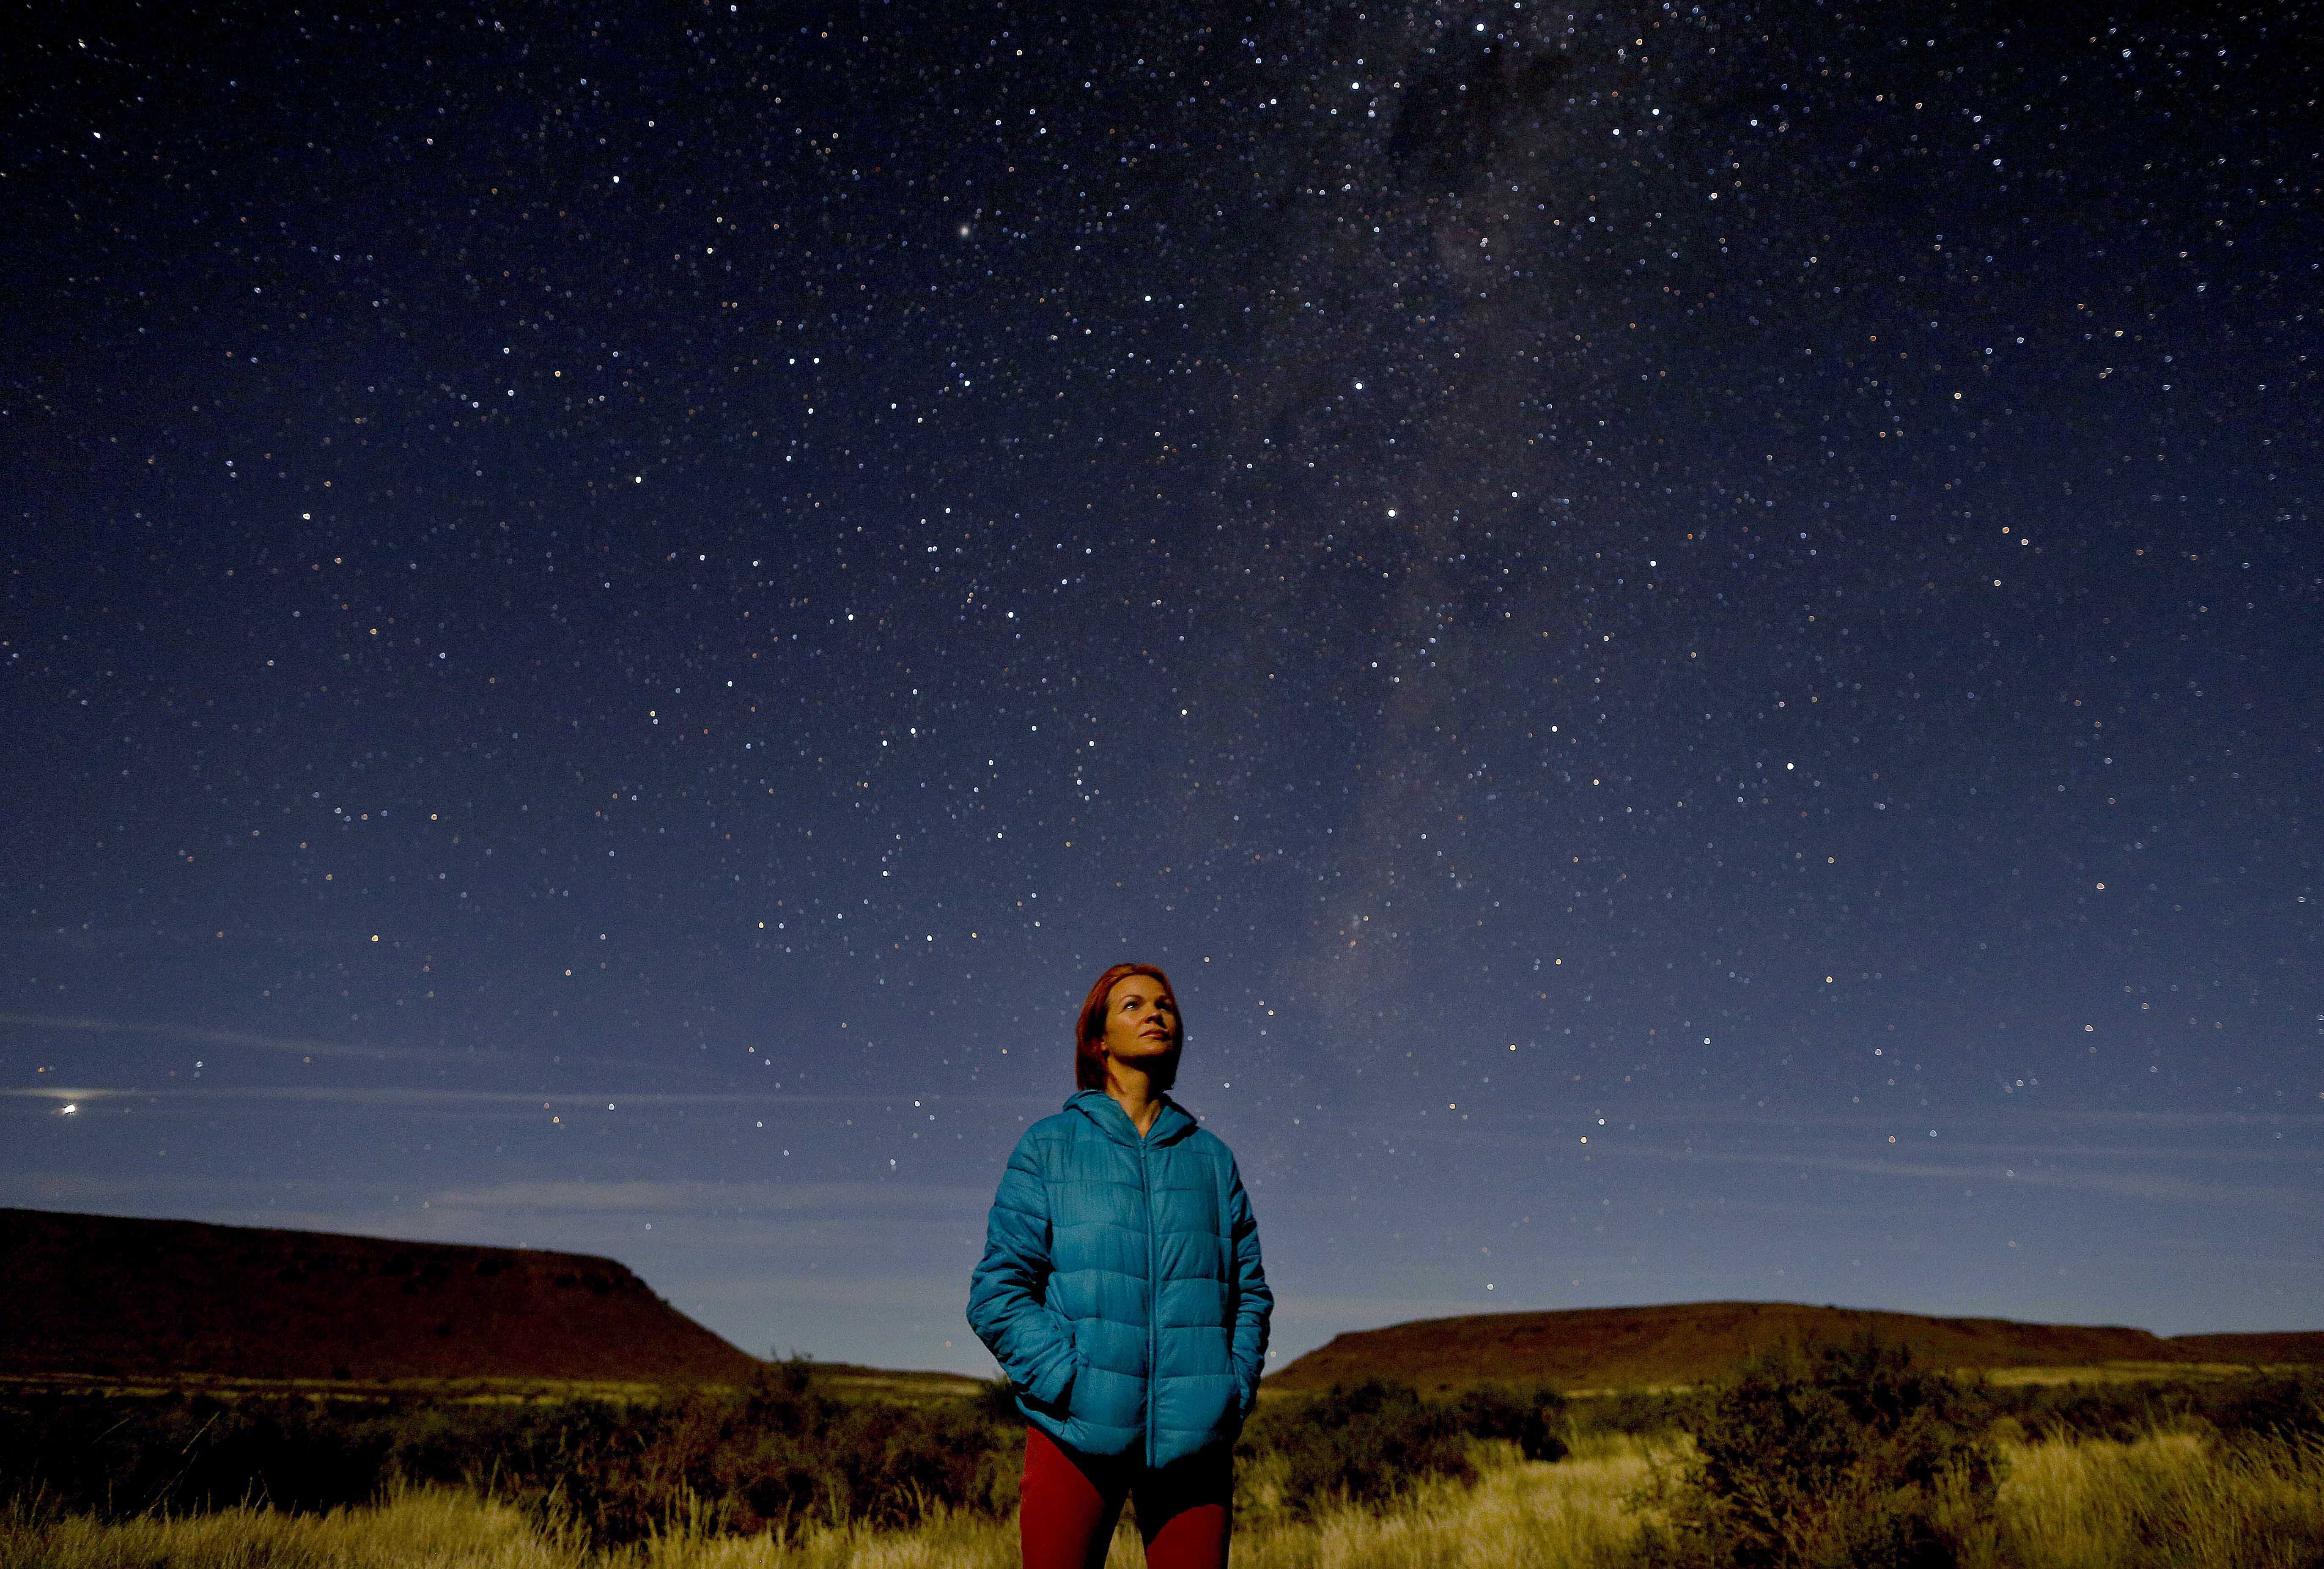 A tourist looks skywards at the southern constellation of stars outside Calvinia, South Africa, 22 April 2018. The huge open spaces of the Karoo Desert are perfect for star gazing as there is no light pollution from cities or towns to interfere. EPA-EFE/KIM LUDBROOK